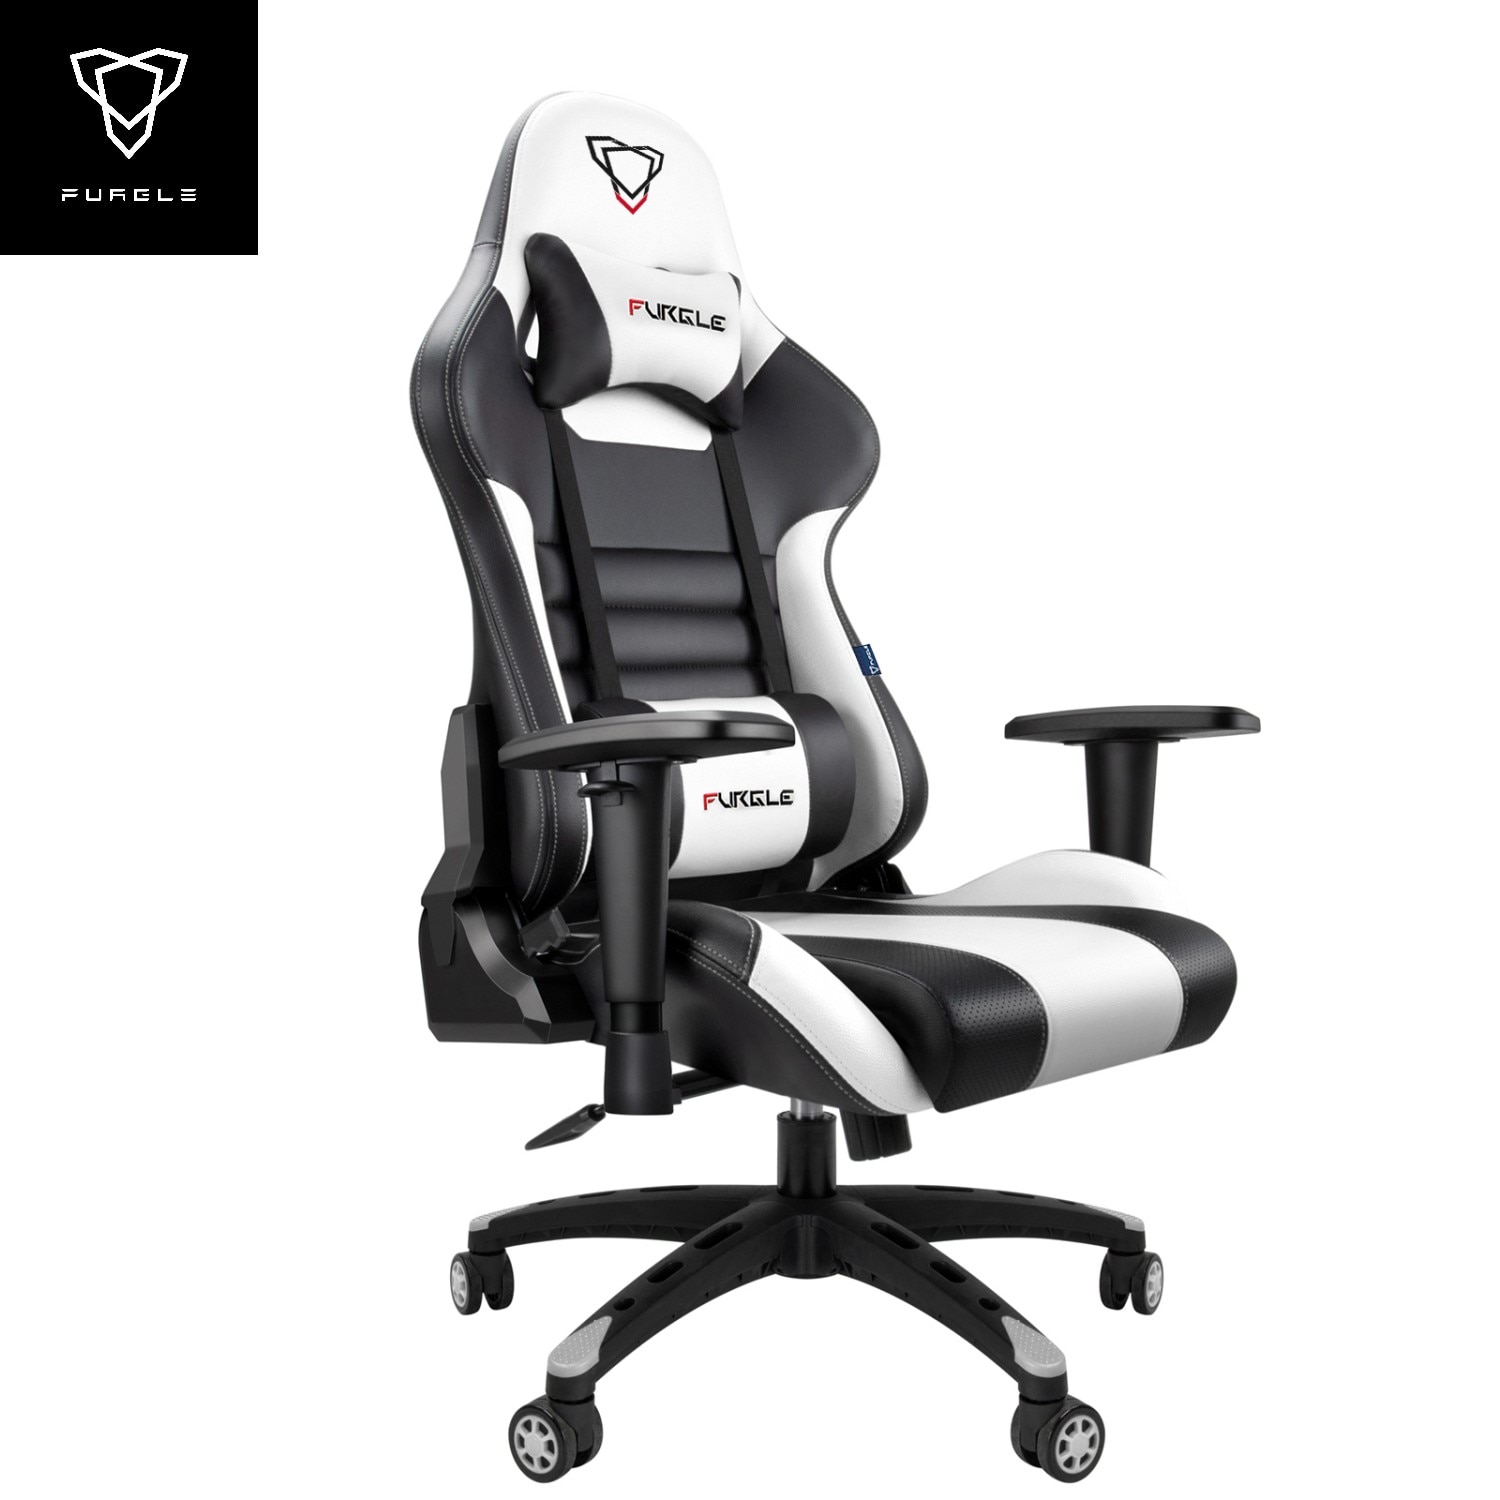 Furgle Modern Gaming Chair Computer Chair Armchair Rocking Reclining Chair with PU Leather WCG Game Chairs for Office Furniture